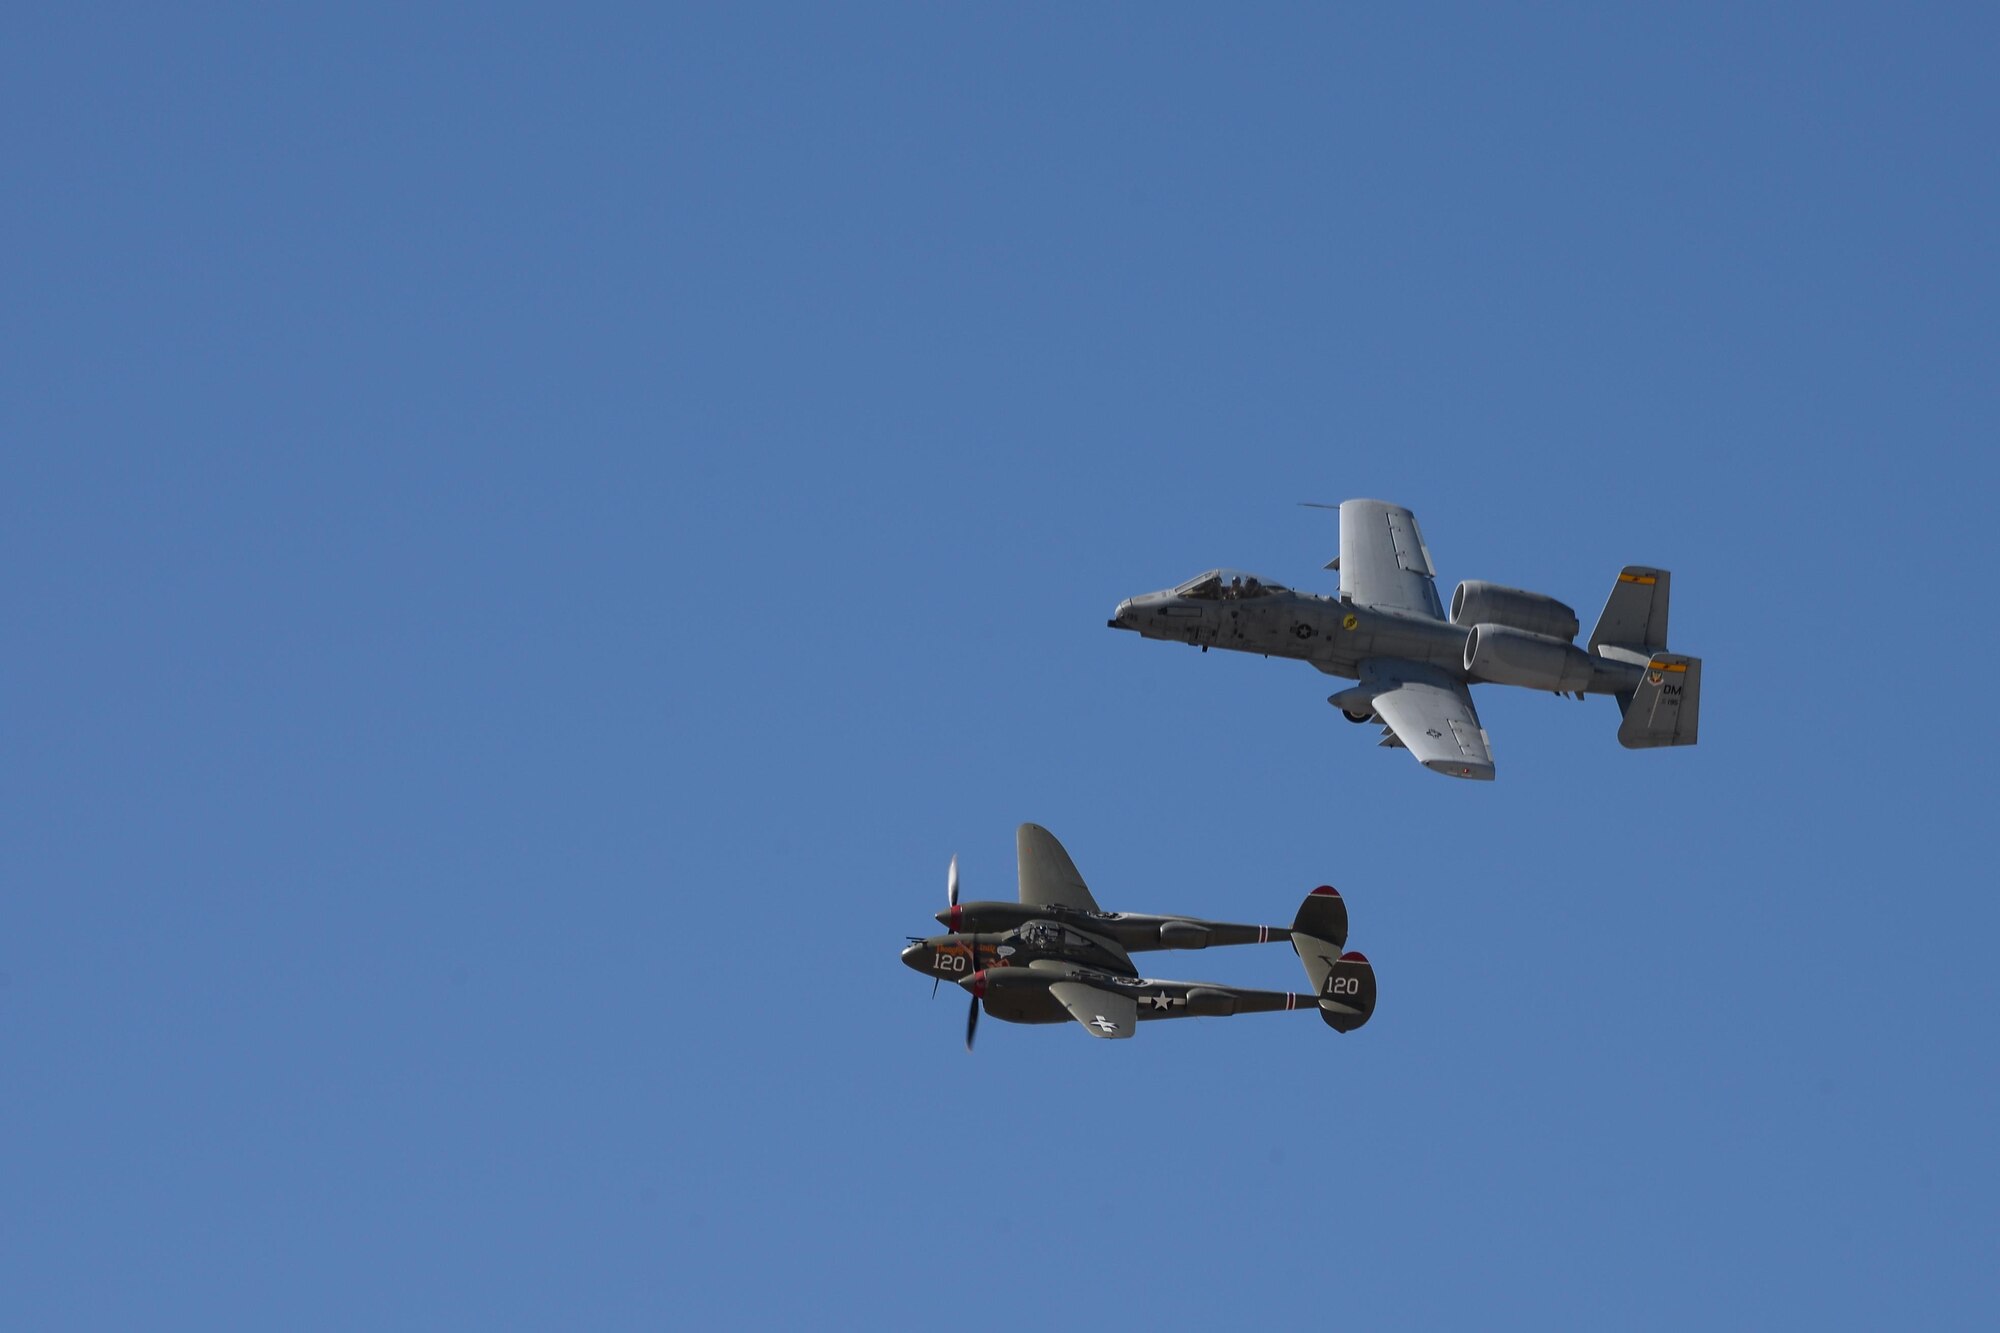 A U.S. Air Force A-10C Thunderbolt II and a P-38 Lightning fly in formation during the 2017 Heritage Flight Training and Certification Course at Davis-Monthan Air Force Base, Ariz., Feb. 10, 2017. During the course, aircrews practice ground and flight training to enable civilian pilots of historic military aircraft and U.S. Air Force pilots of current fighter aircraft to fly safely in formations together. (U.S. Air Force photo by Senior Airman Ashley N. Steffen)